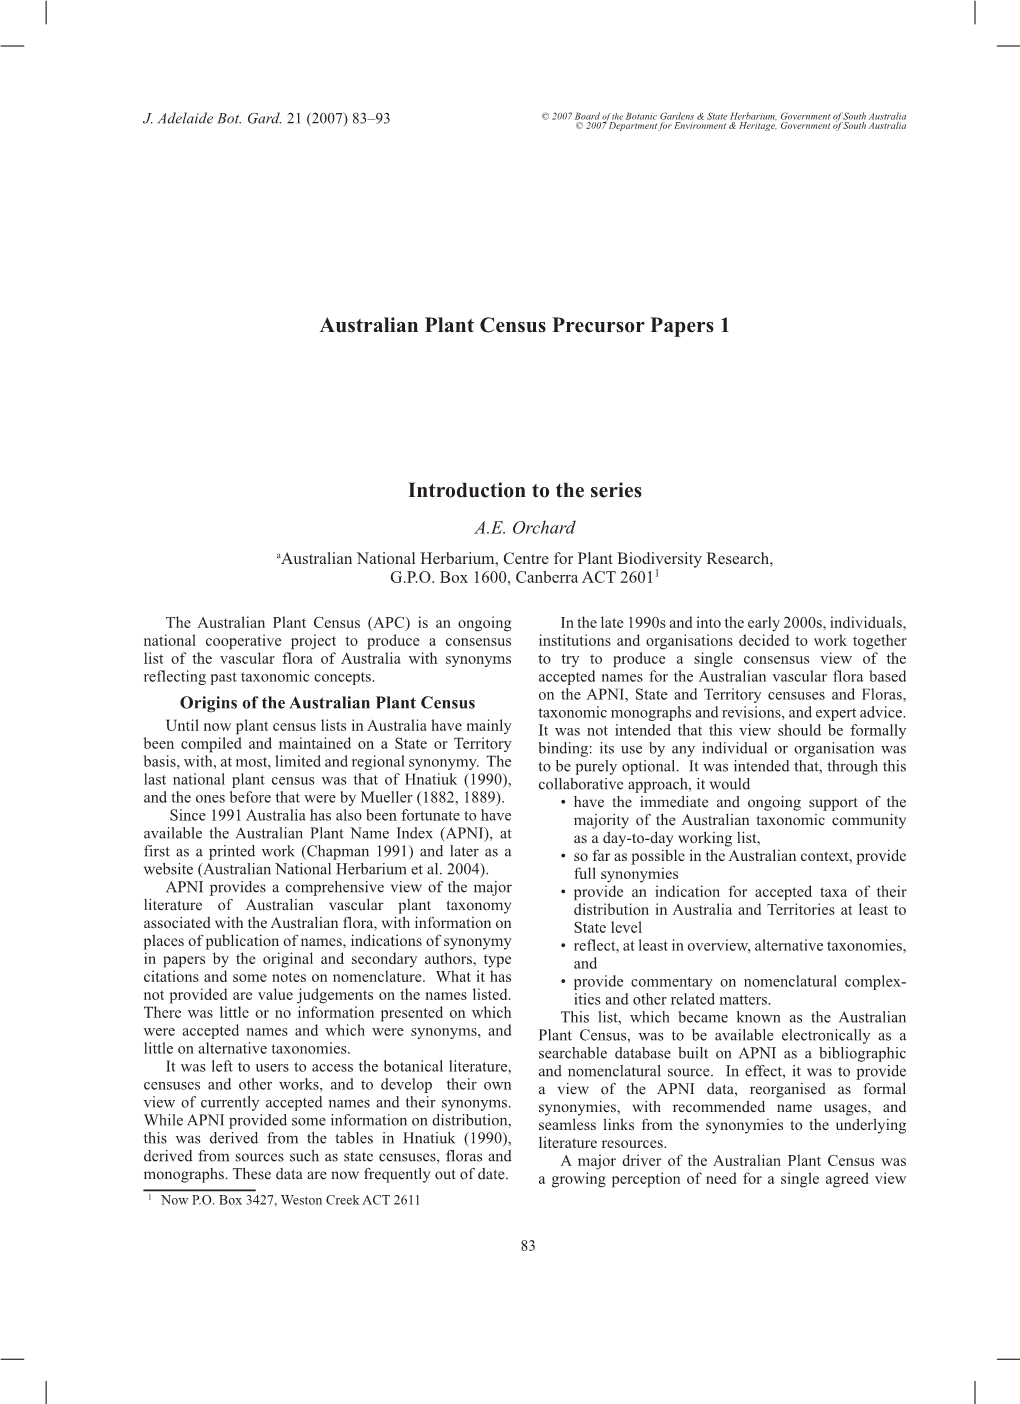 Australian Plant Census Precursor Papers 1 Introduction to the Series